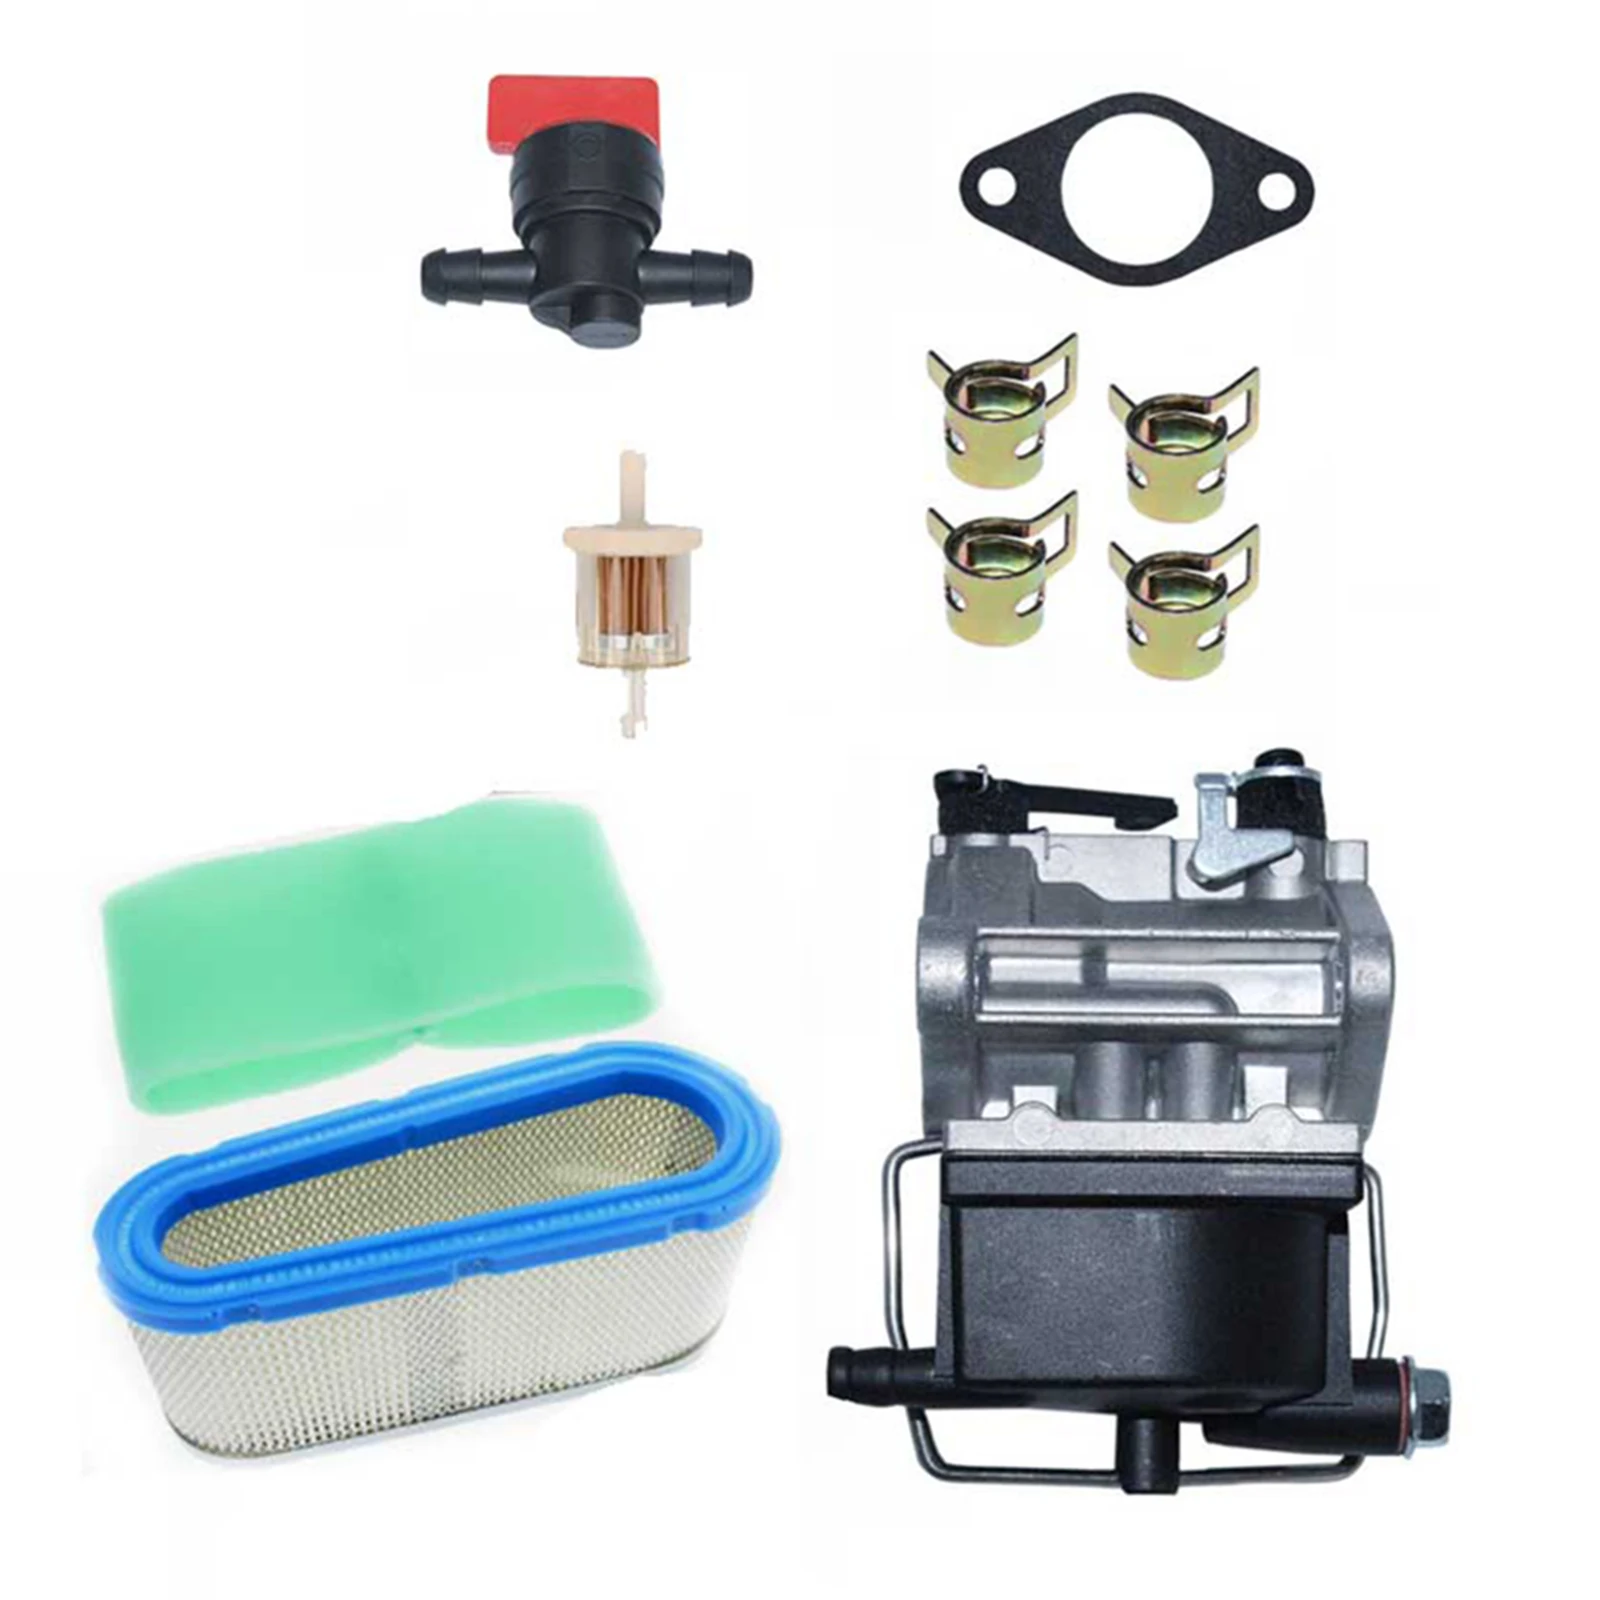 

1pc Carburetor Air Filter Kit Replacement For-Tecumseh OHV110 OHV115 OHV120 OHV125 OHV130 OHV135 Lawn Mower Accessories